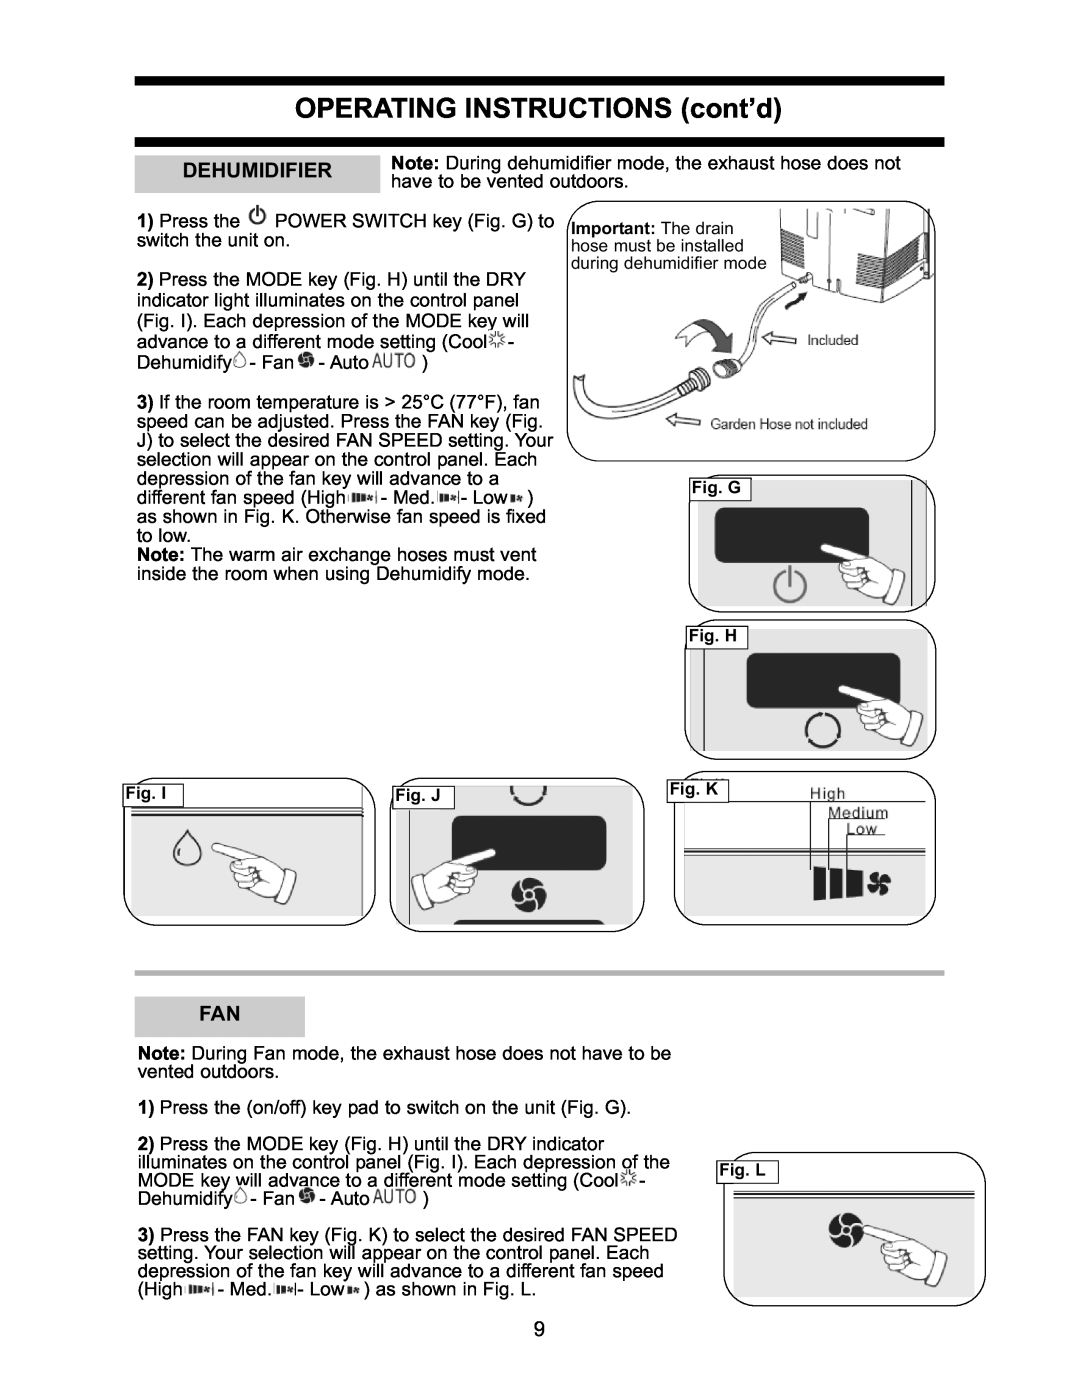 Danby DPAC7099 operating instructions OPERATING INSTRUCTIONS cont’d, Dehumidifier 